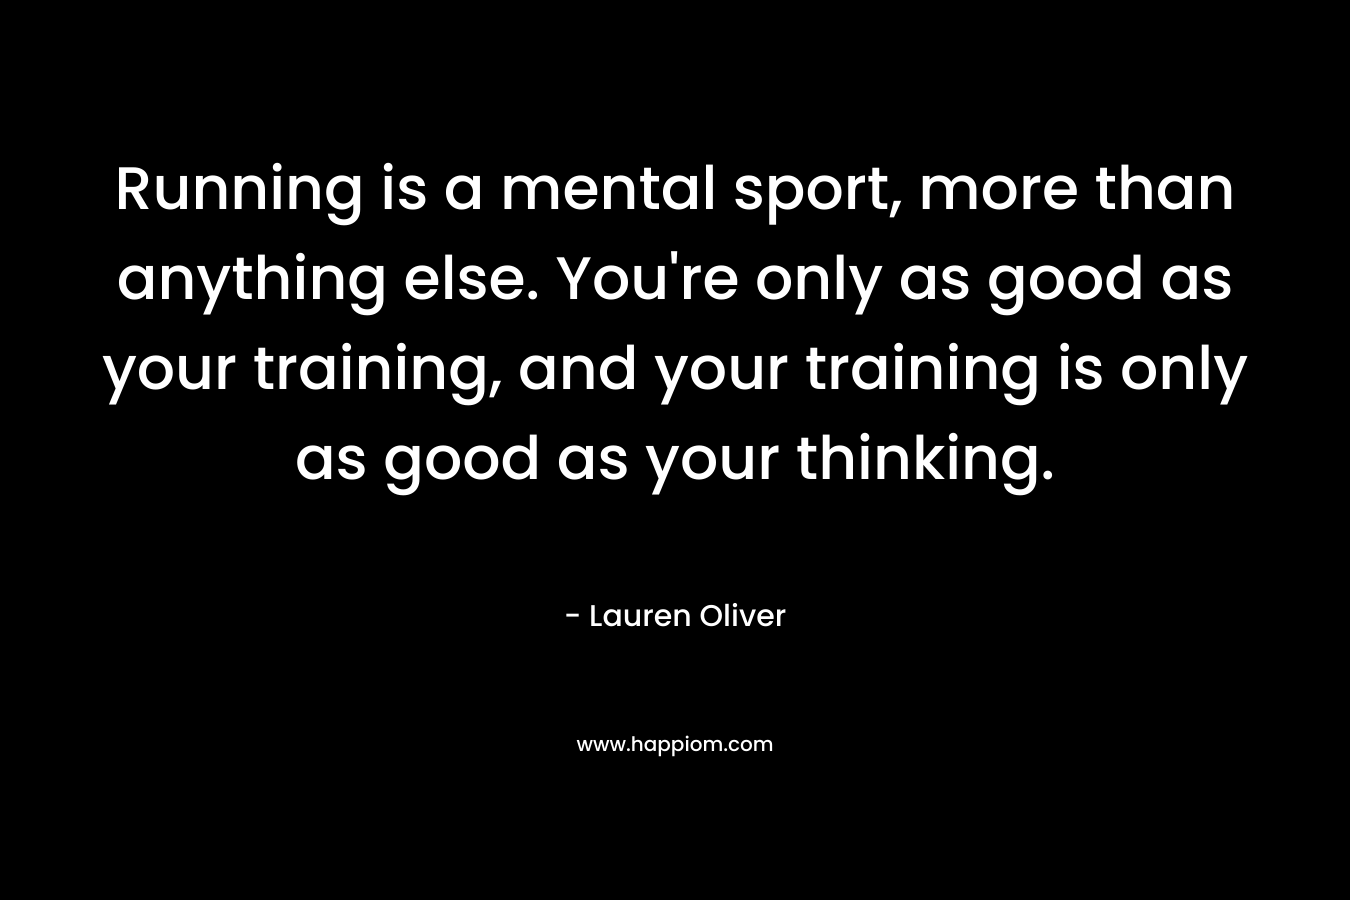 Running is a mental sport, more than anything else. You're only as good as your training, and your training is only as good as your thinking.